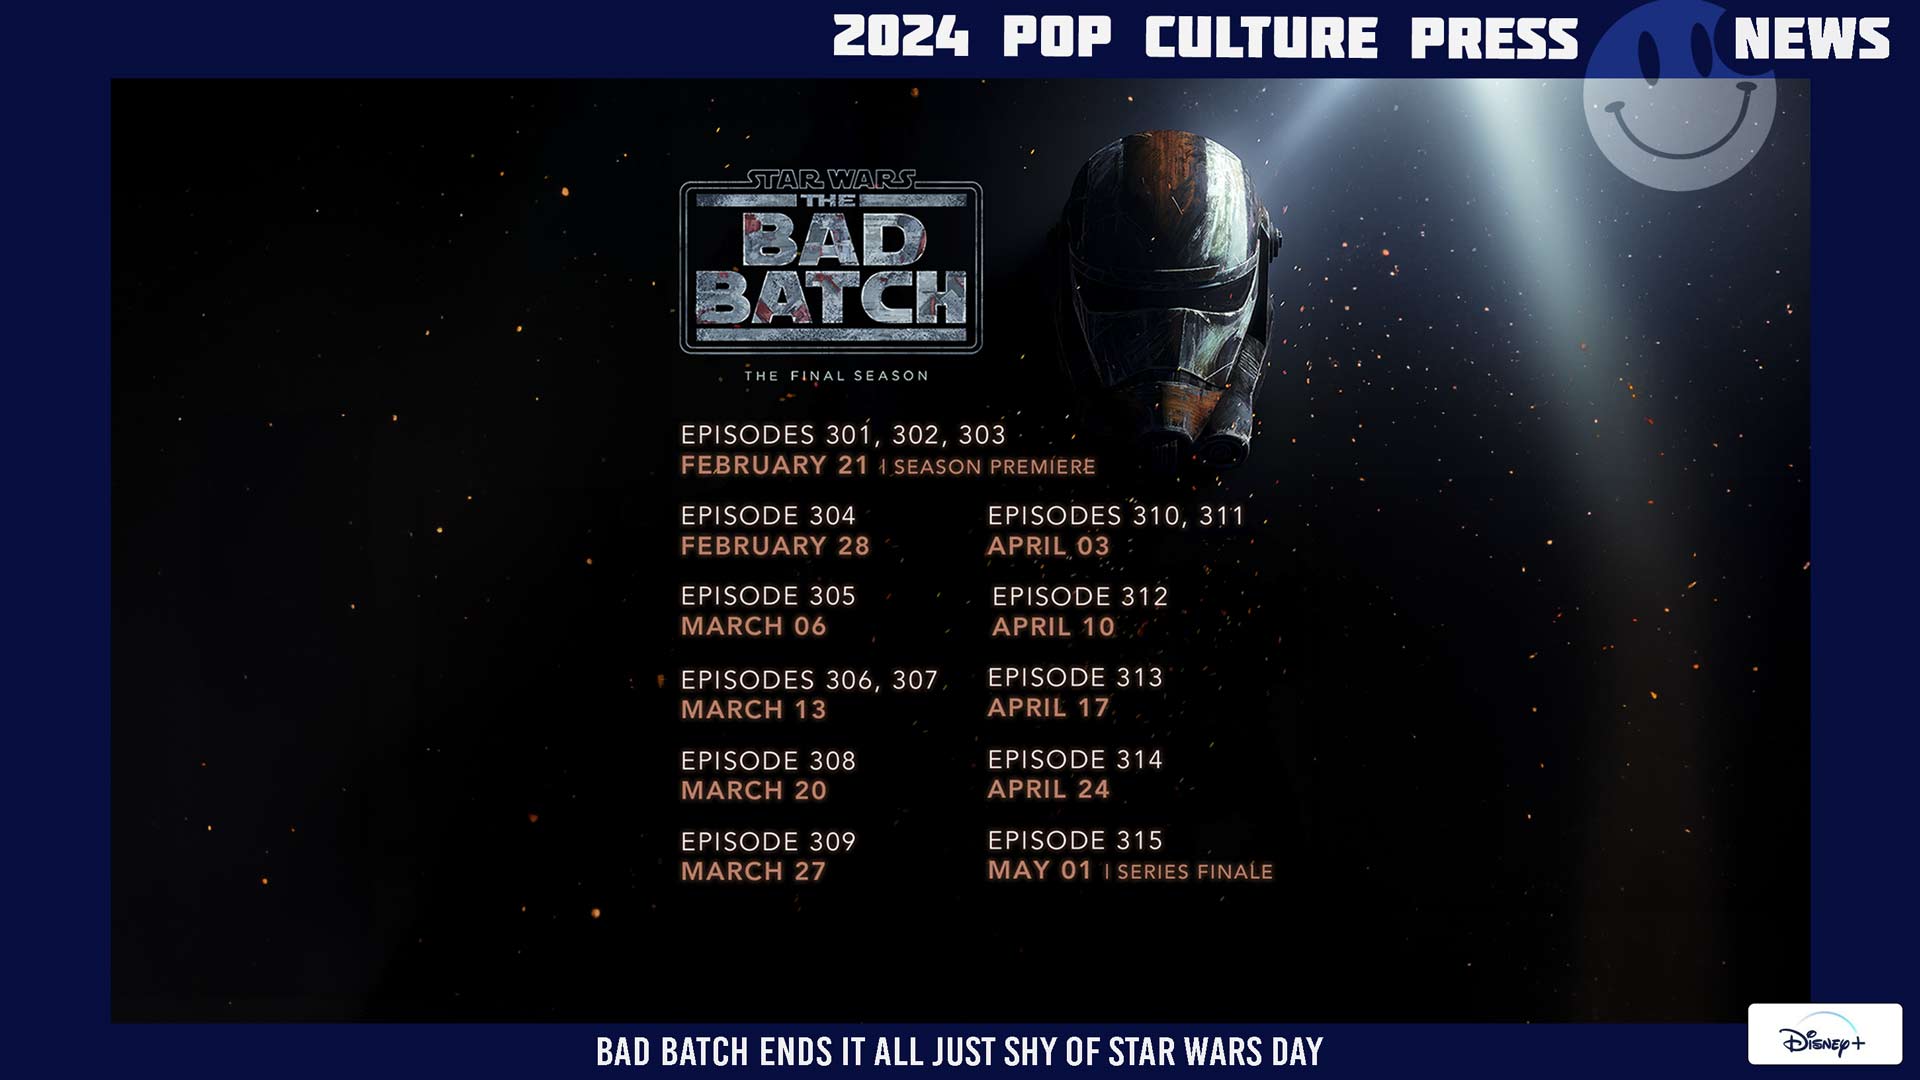 Clone Trooper Helmet in Space with The Bad Batch Final Season Release Dates